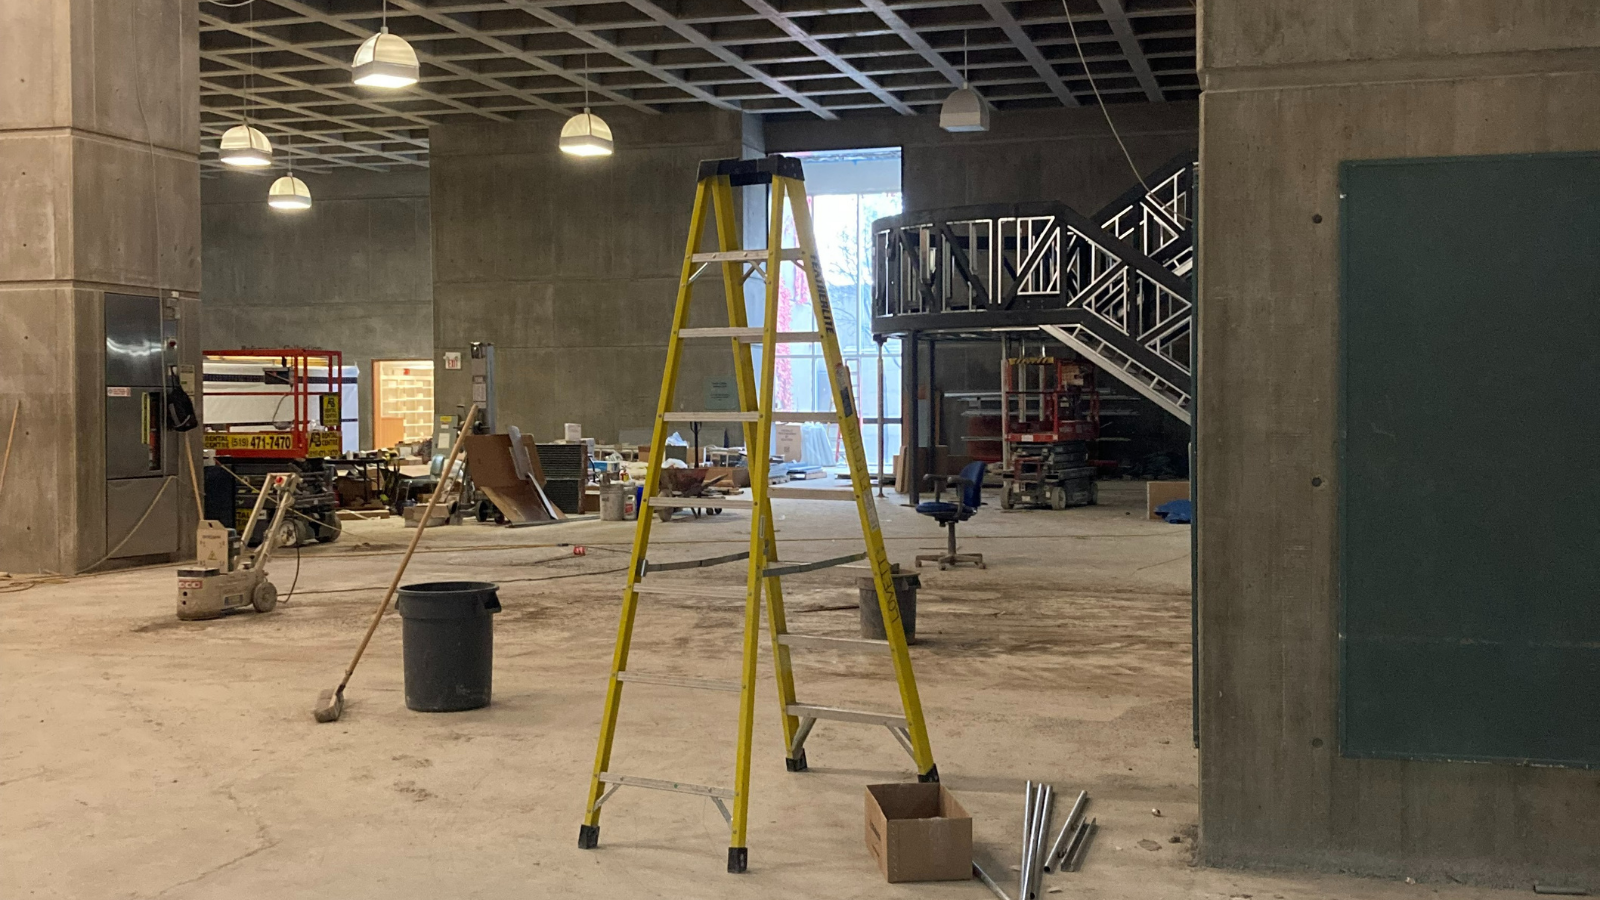 Weldon Library's new two-storey Learning Commons under construction